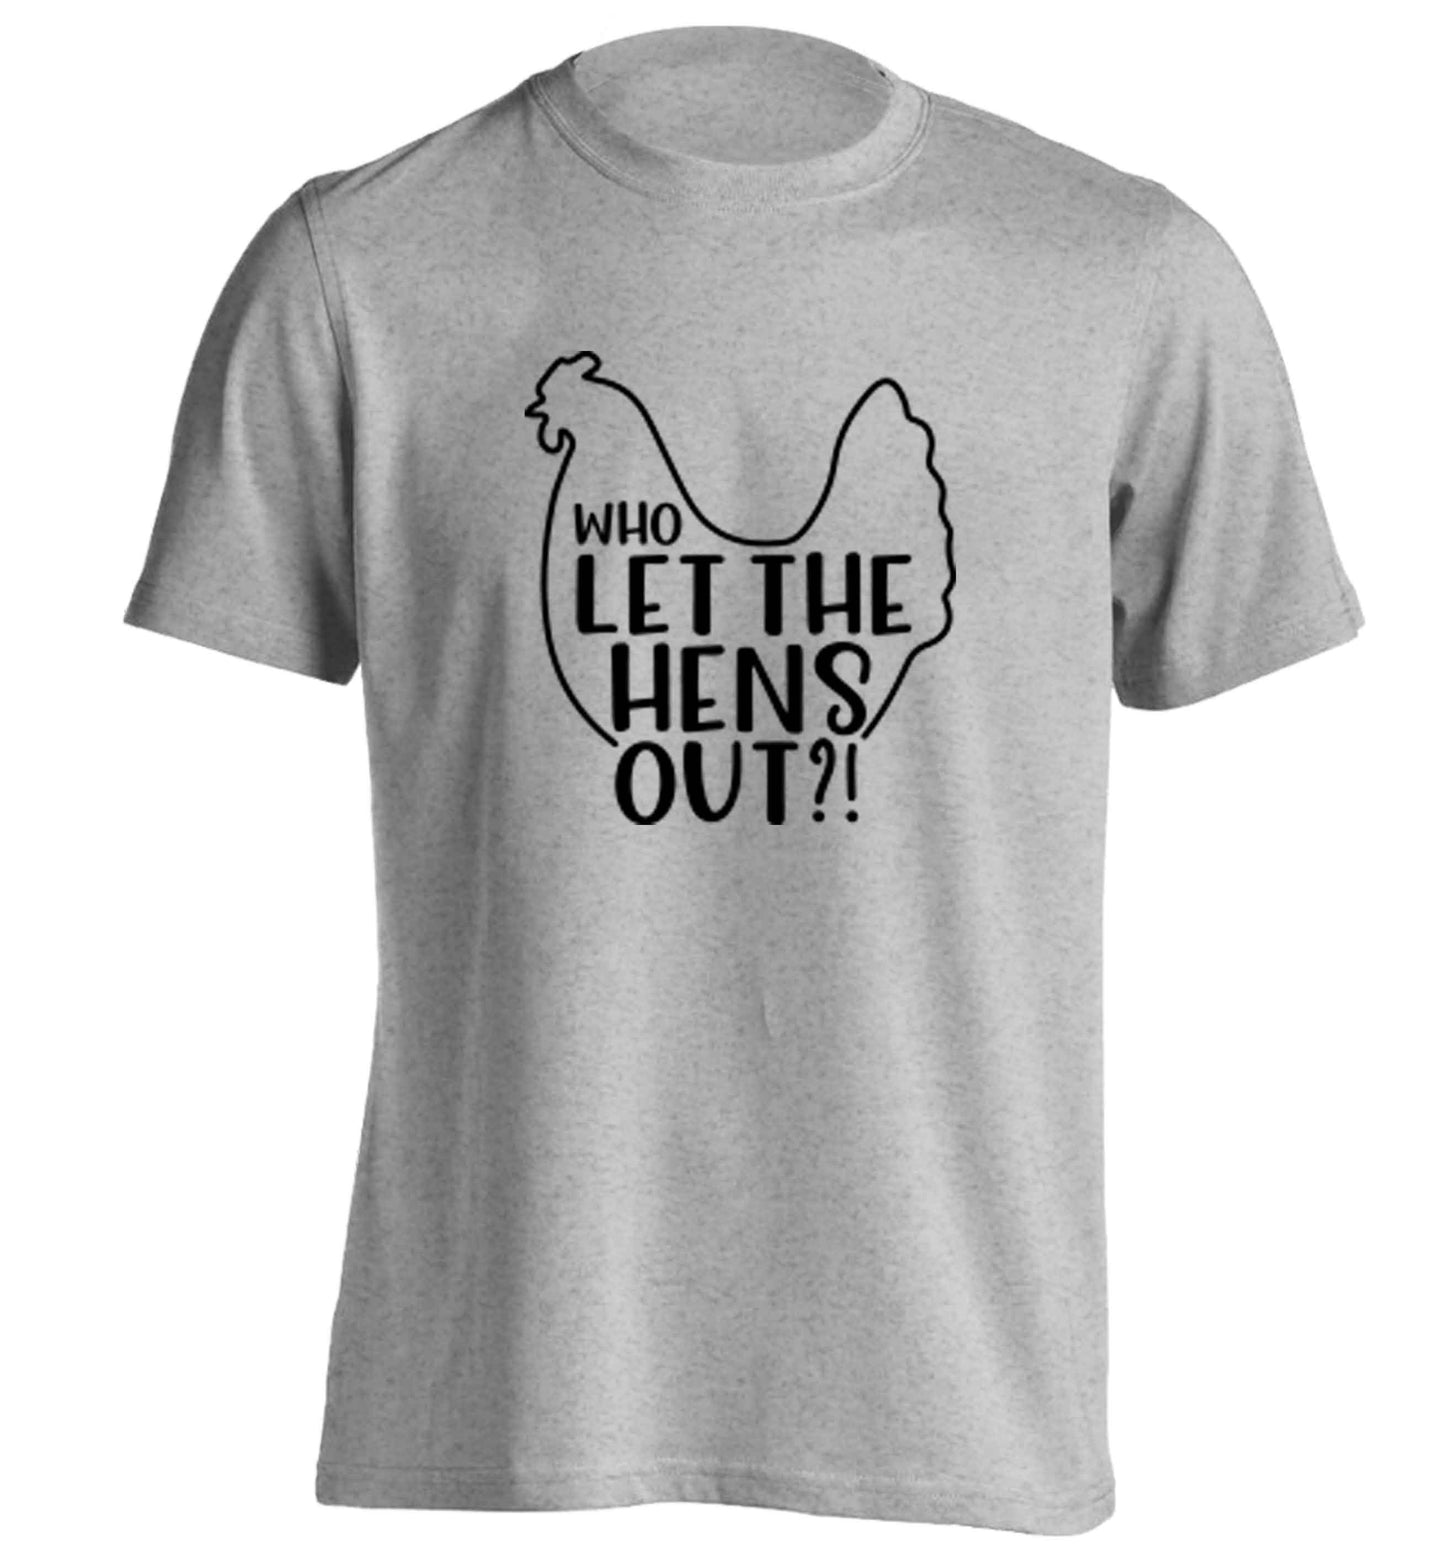 Who let the hens out adults unisex grey Tshirt 2XL